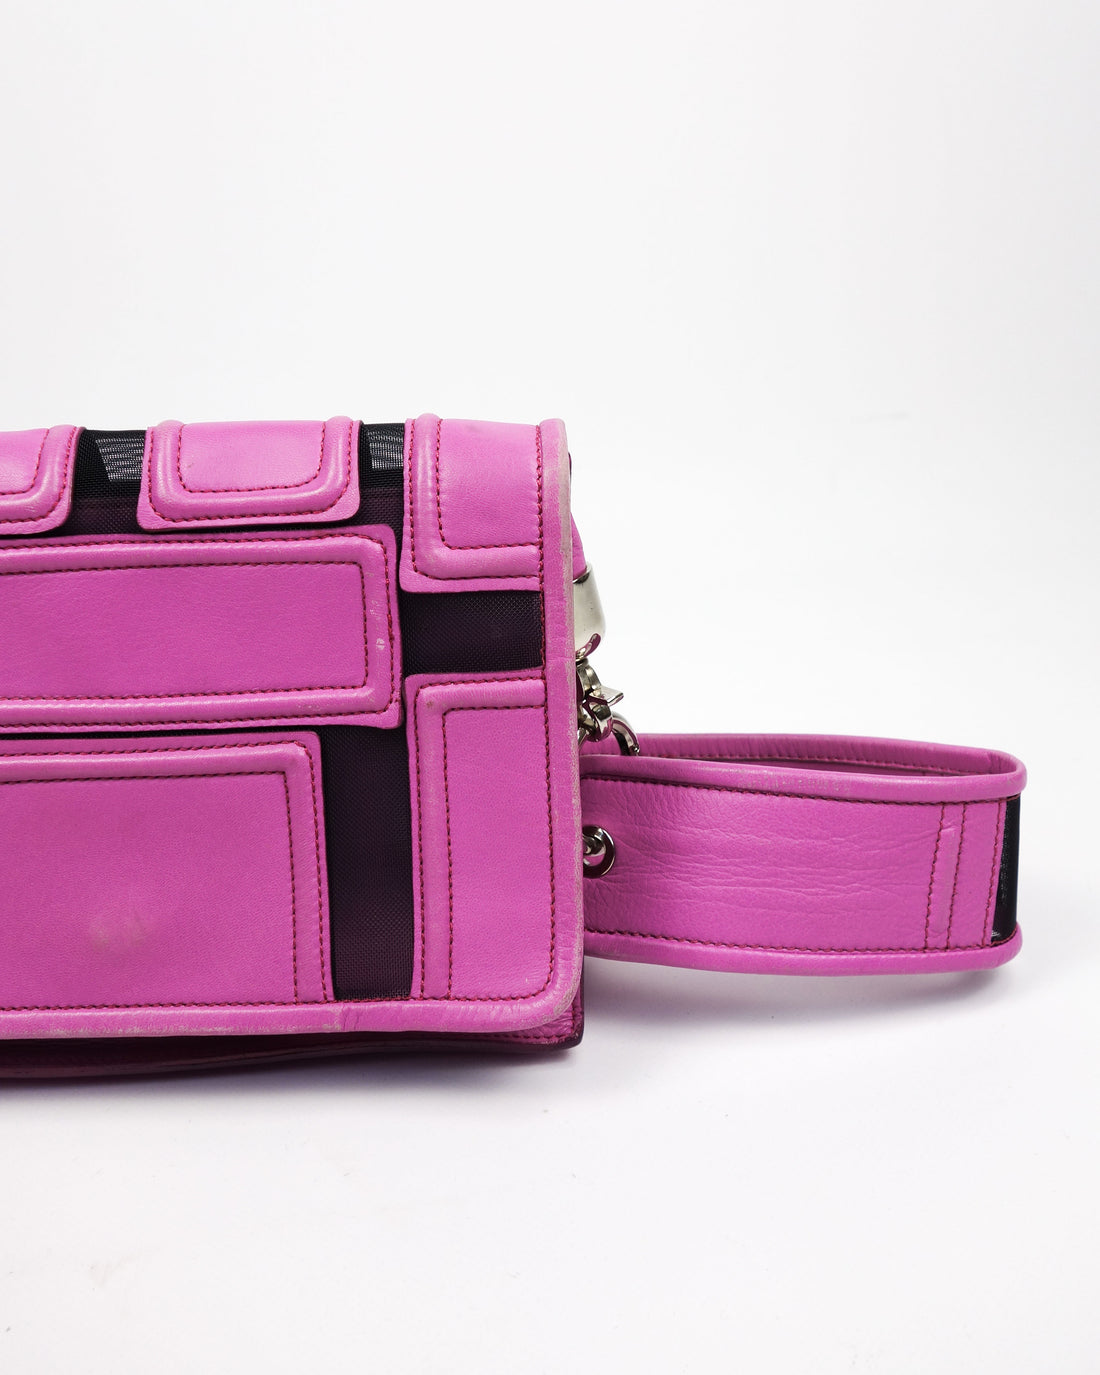 Versace Pink Squares Leather Bag 2000's